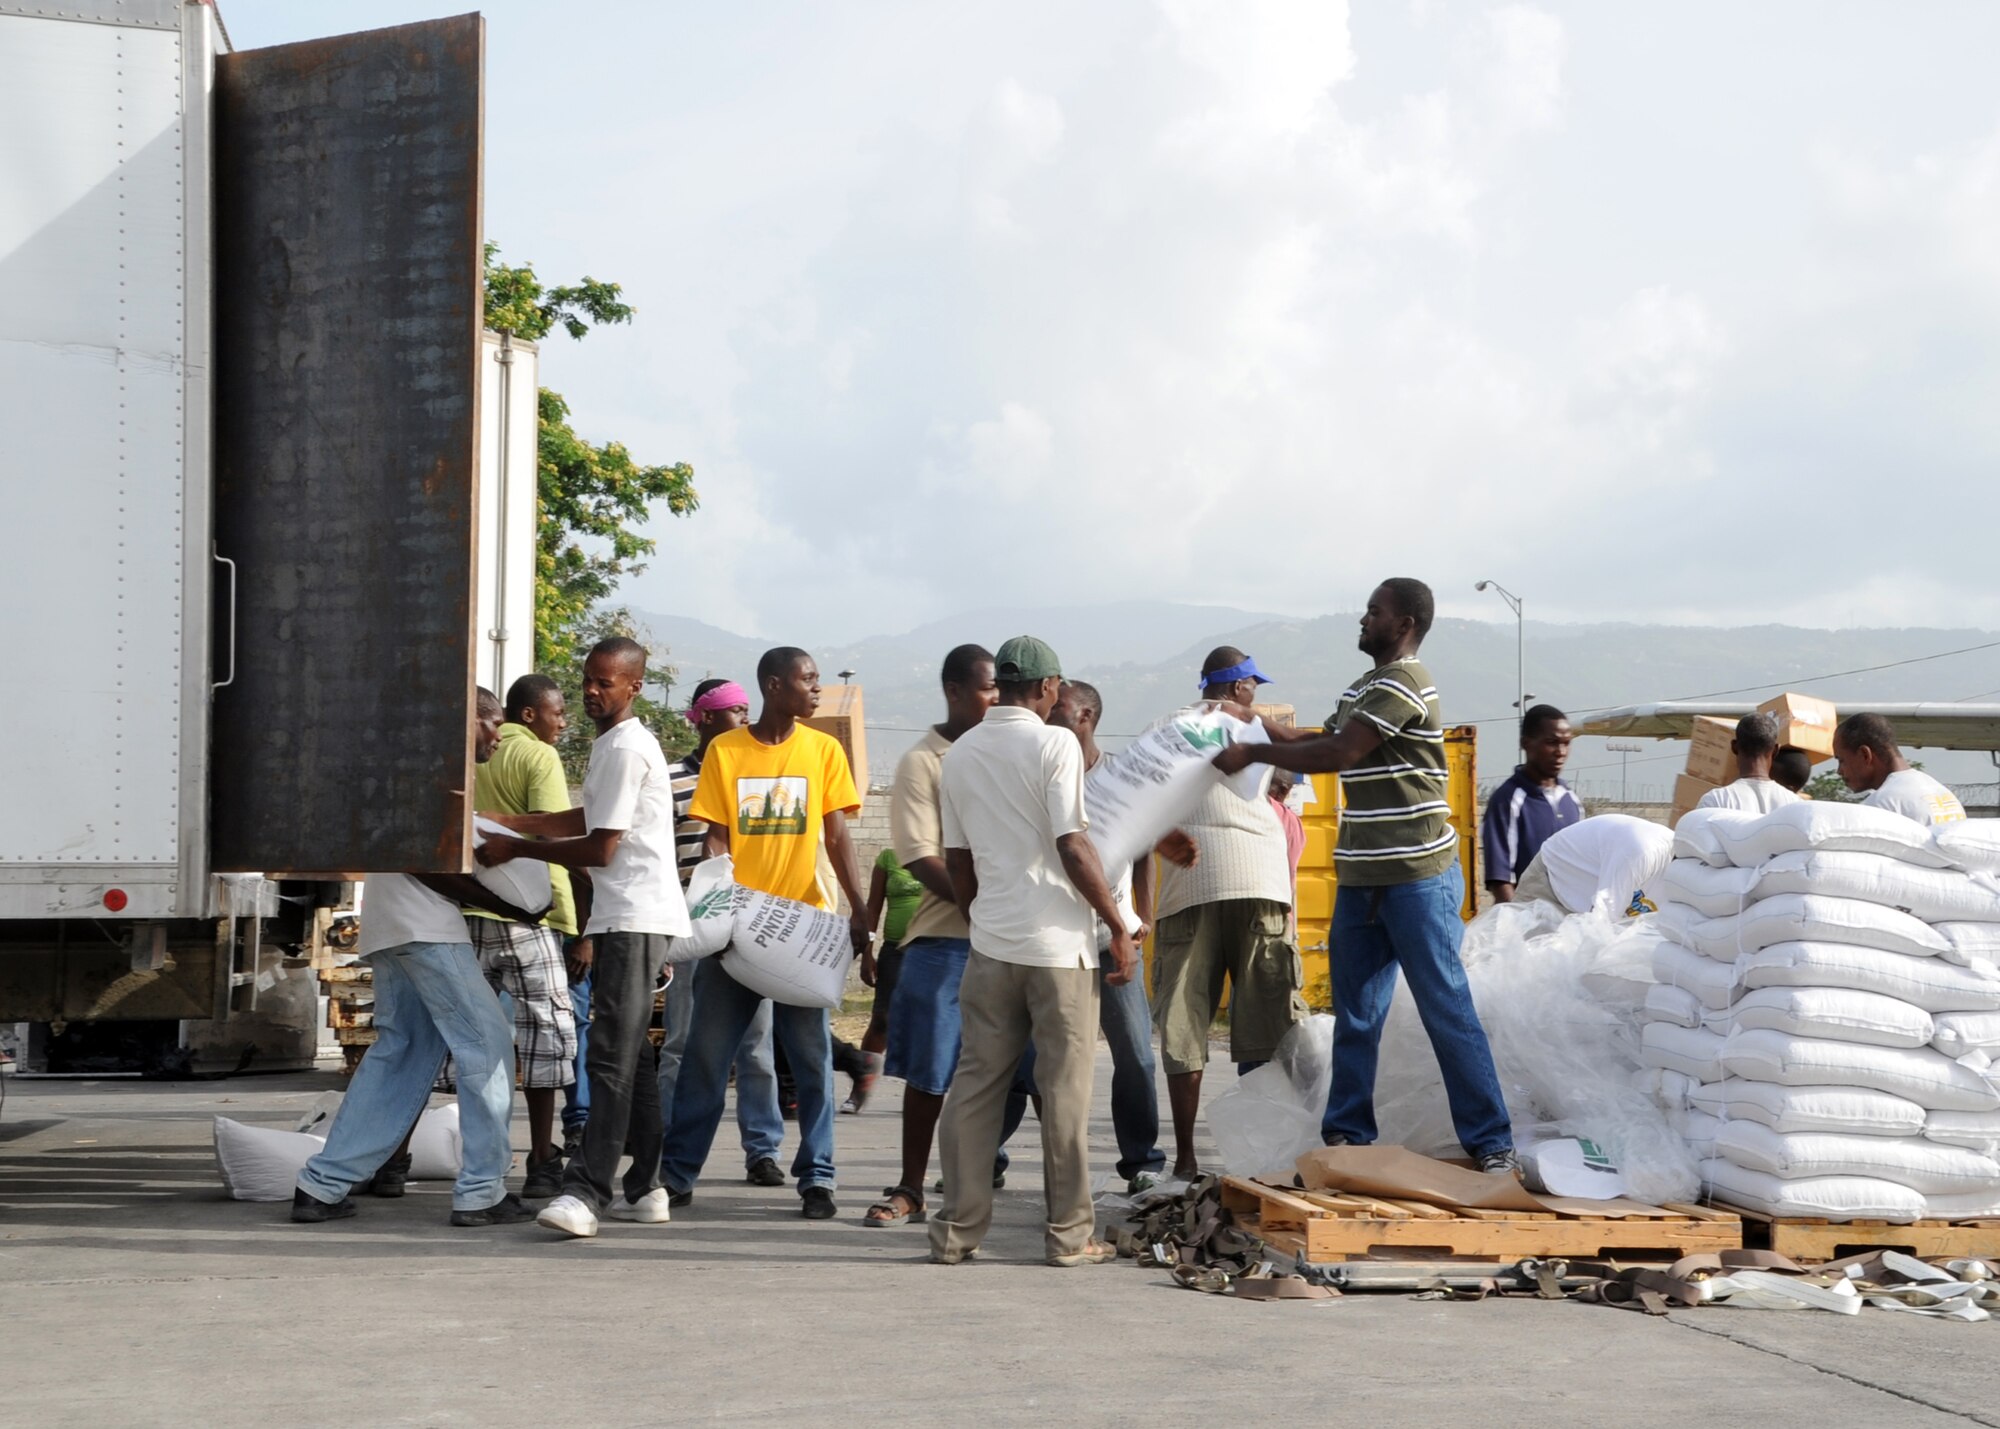 PORT-AU-PRINCE, Haiti – Haitian citizens load a truck with food and medical supplies on the Toussaint Louverture International Airport flightline, June 22, 2012. Fifty thousand pounds of food and medical supplies were delivered by an Altus Air Force Base aircrew to support the Mission Lifeline in Haiti, which cares for 11,000 men, women, and children. (U.S. Air Force photo by Airman 1st Class Franklin R. Ramos / 97th Air Mobility Wing / Released)